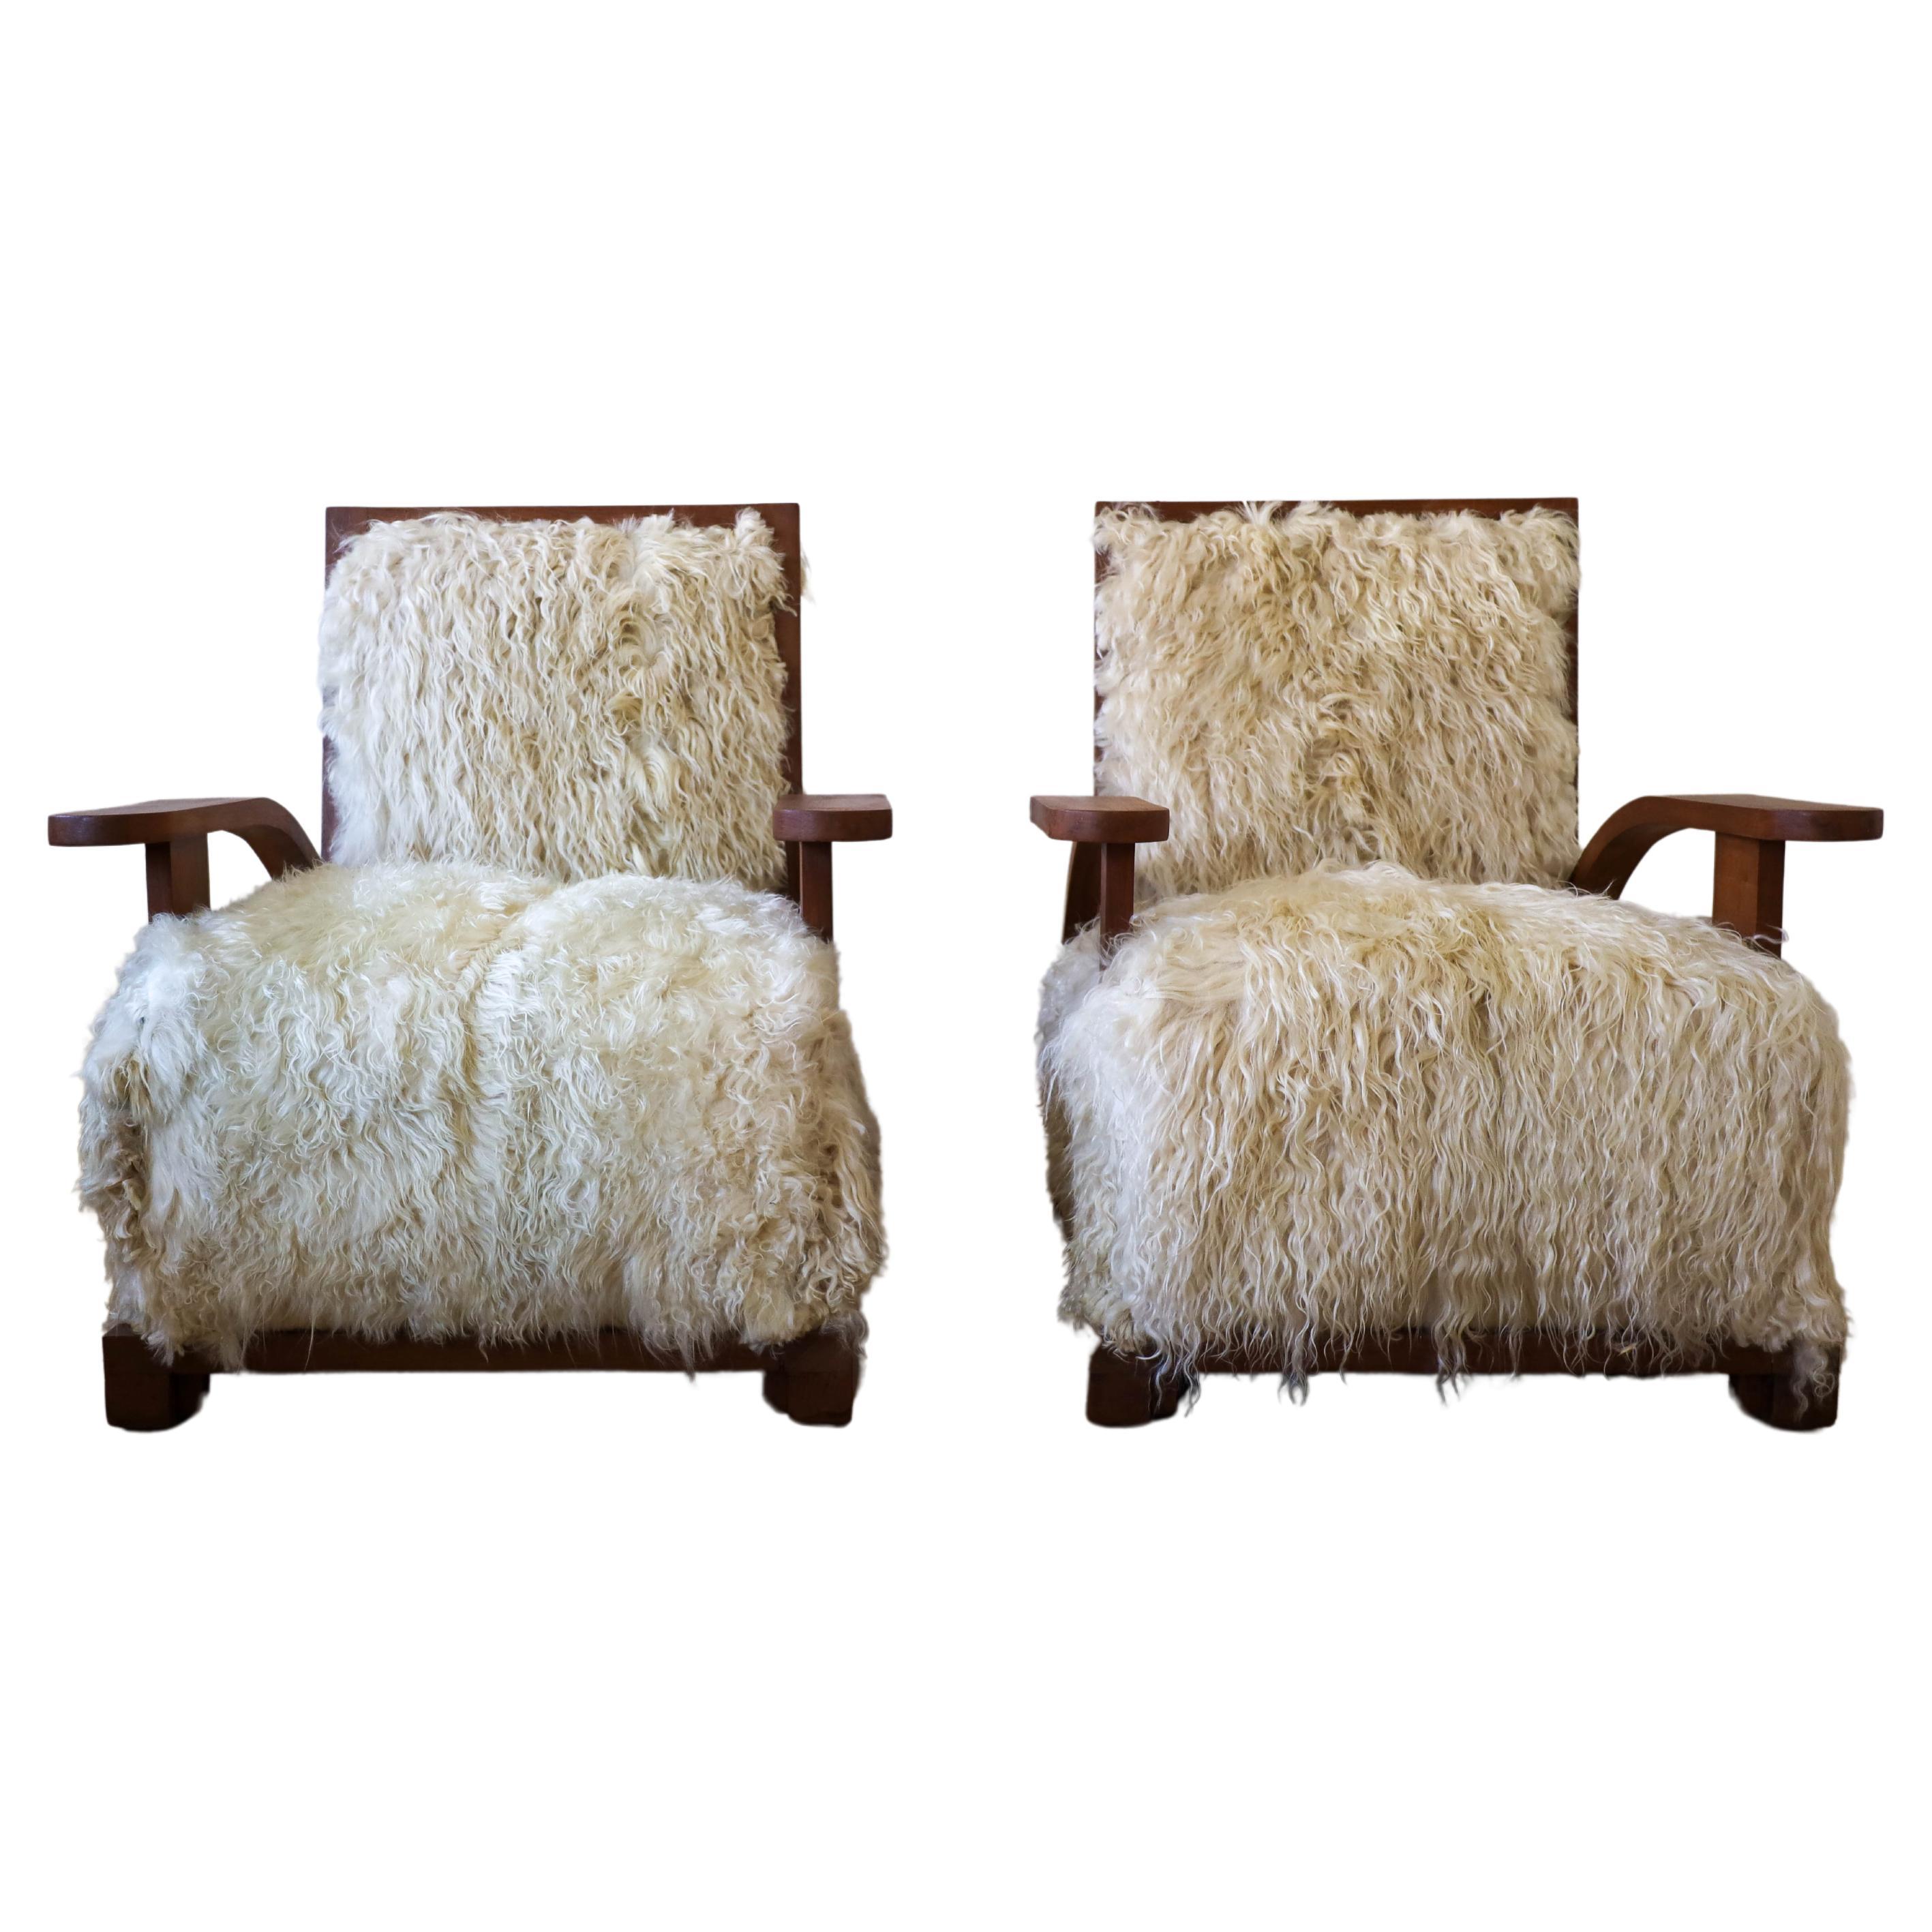 Antique Pair of Art Deco Club Chairs, reupholstered in Angora Goat, Early 1900s For Sale